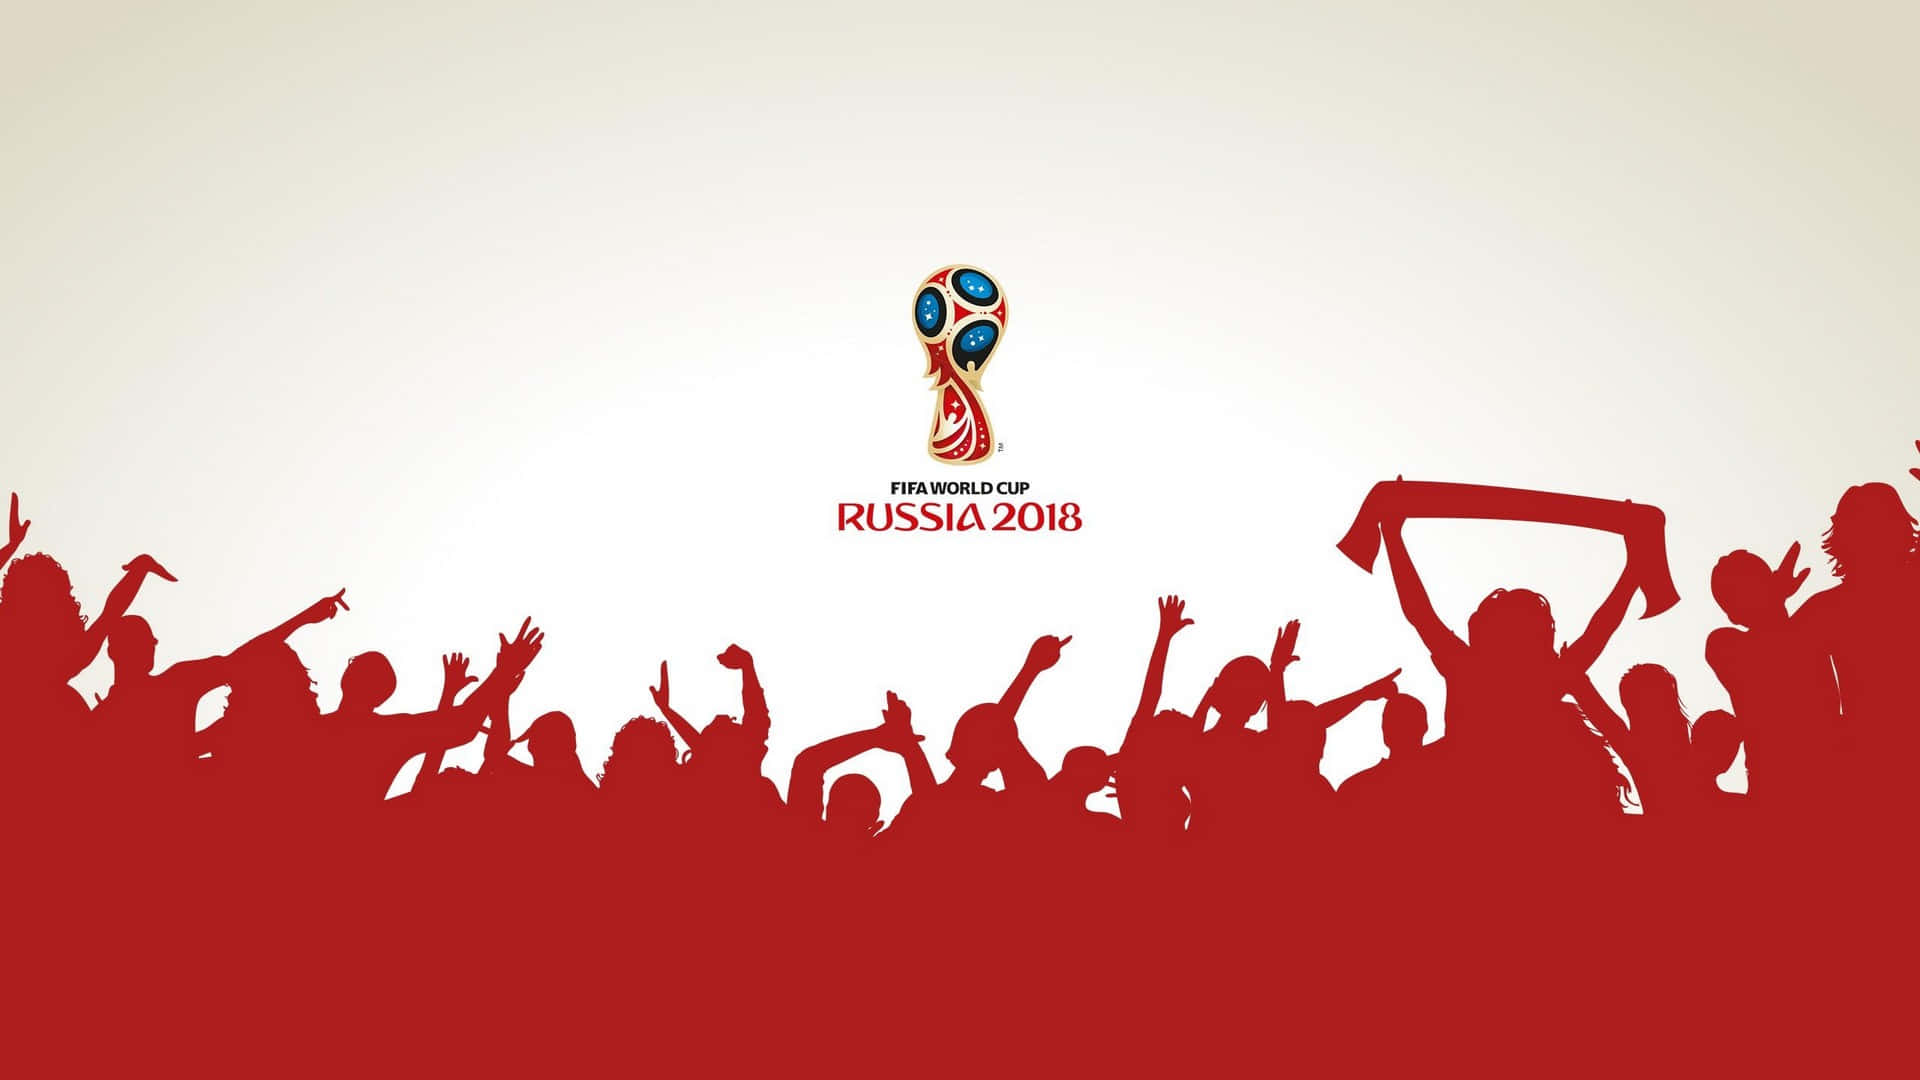 The World Cup Logo With People In The Background